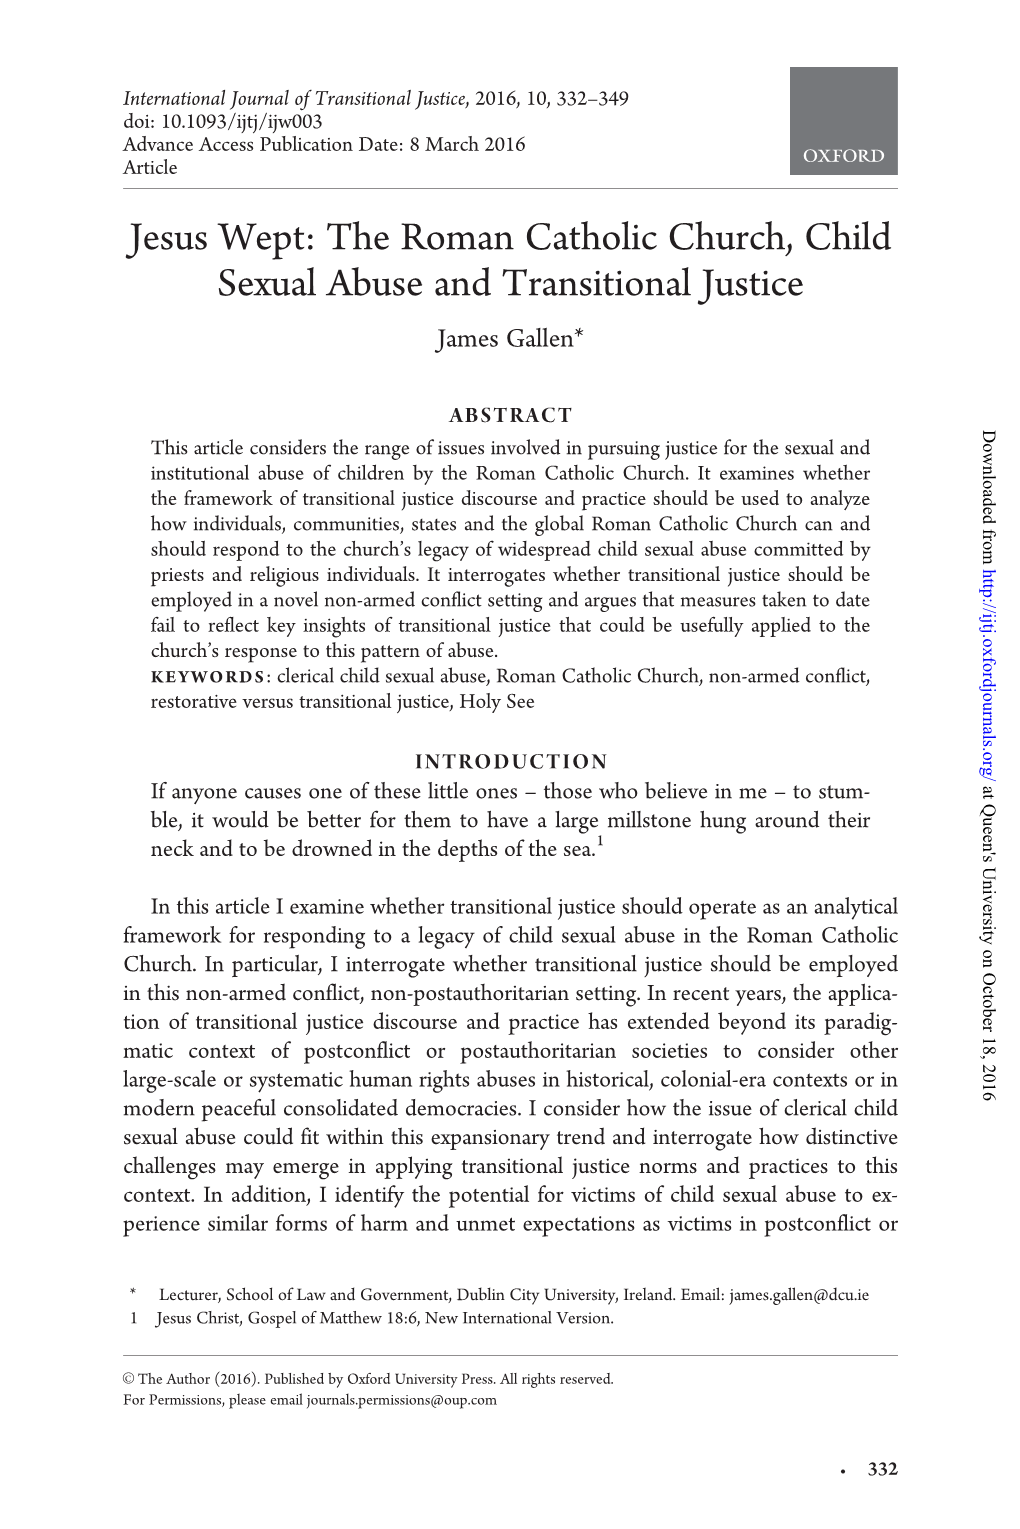 The Roman Catholic Church, Child Sexual Abuse and Transitional Justice James Gallen*